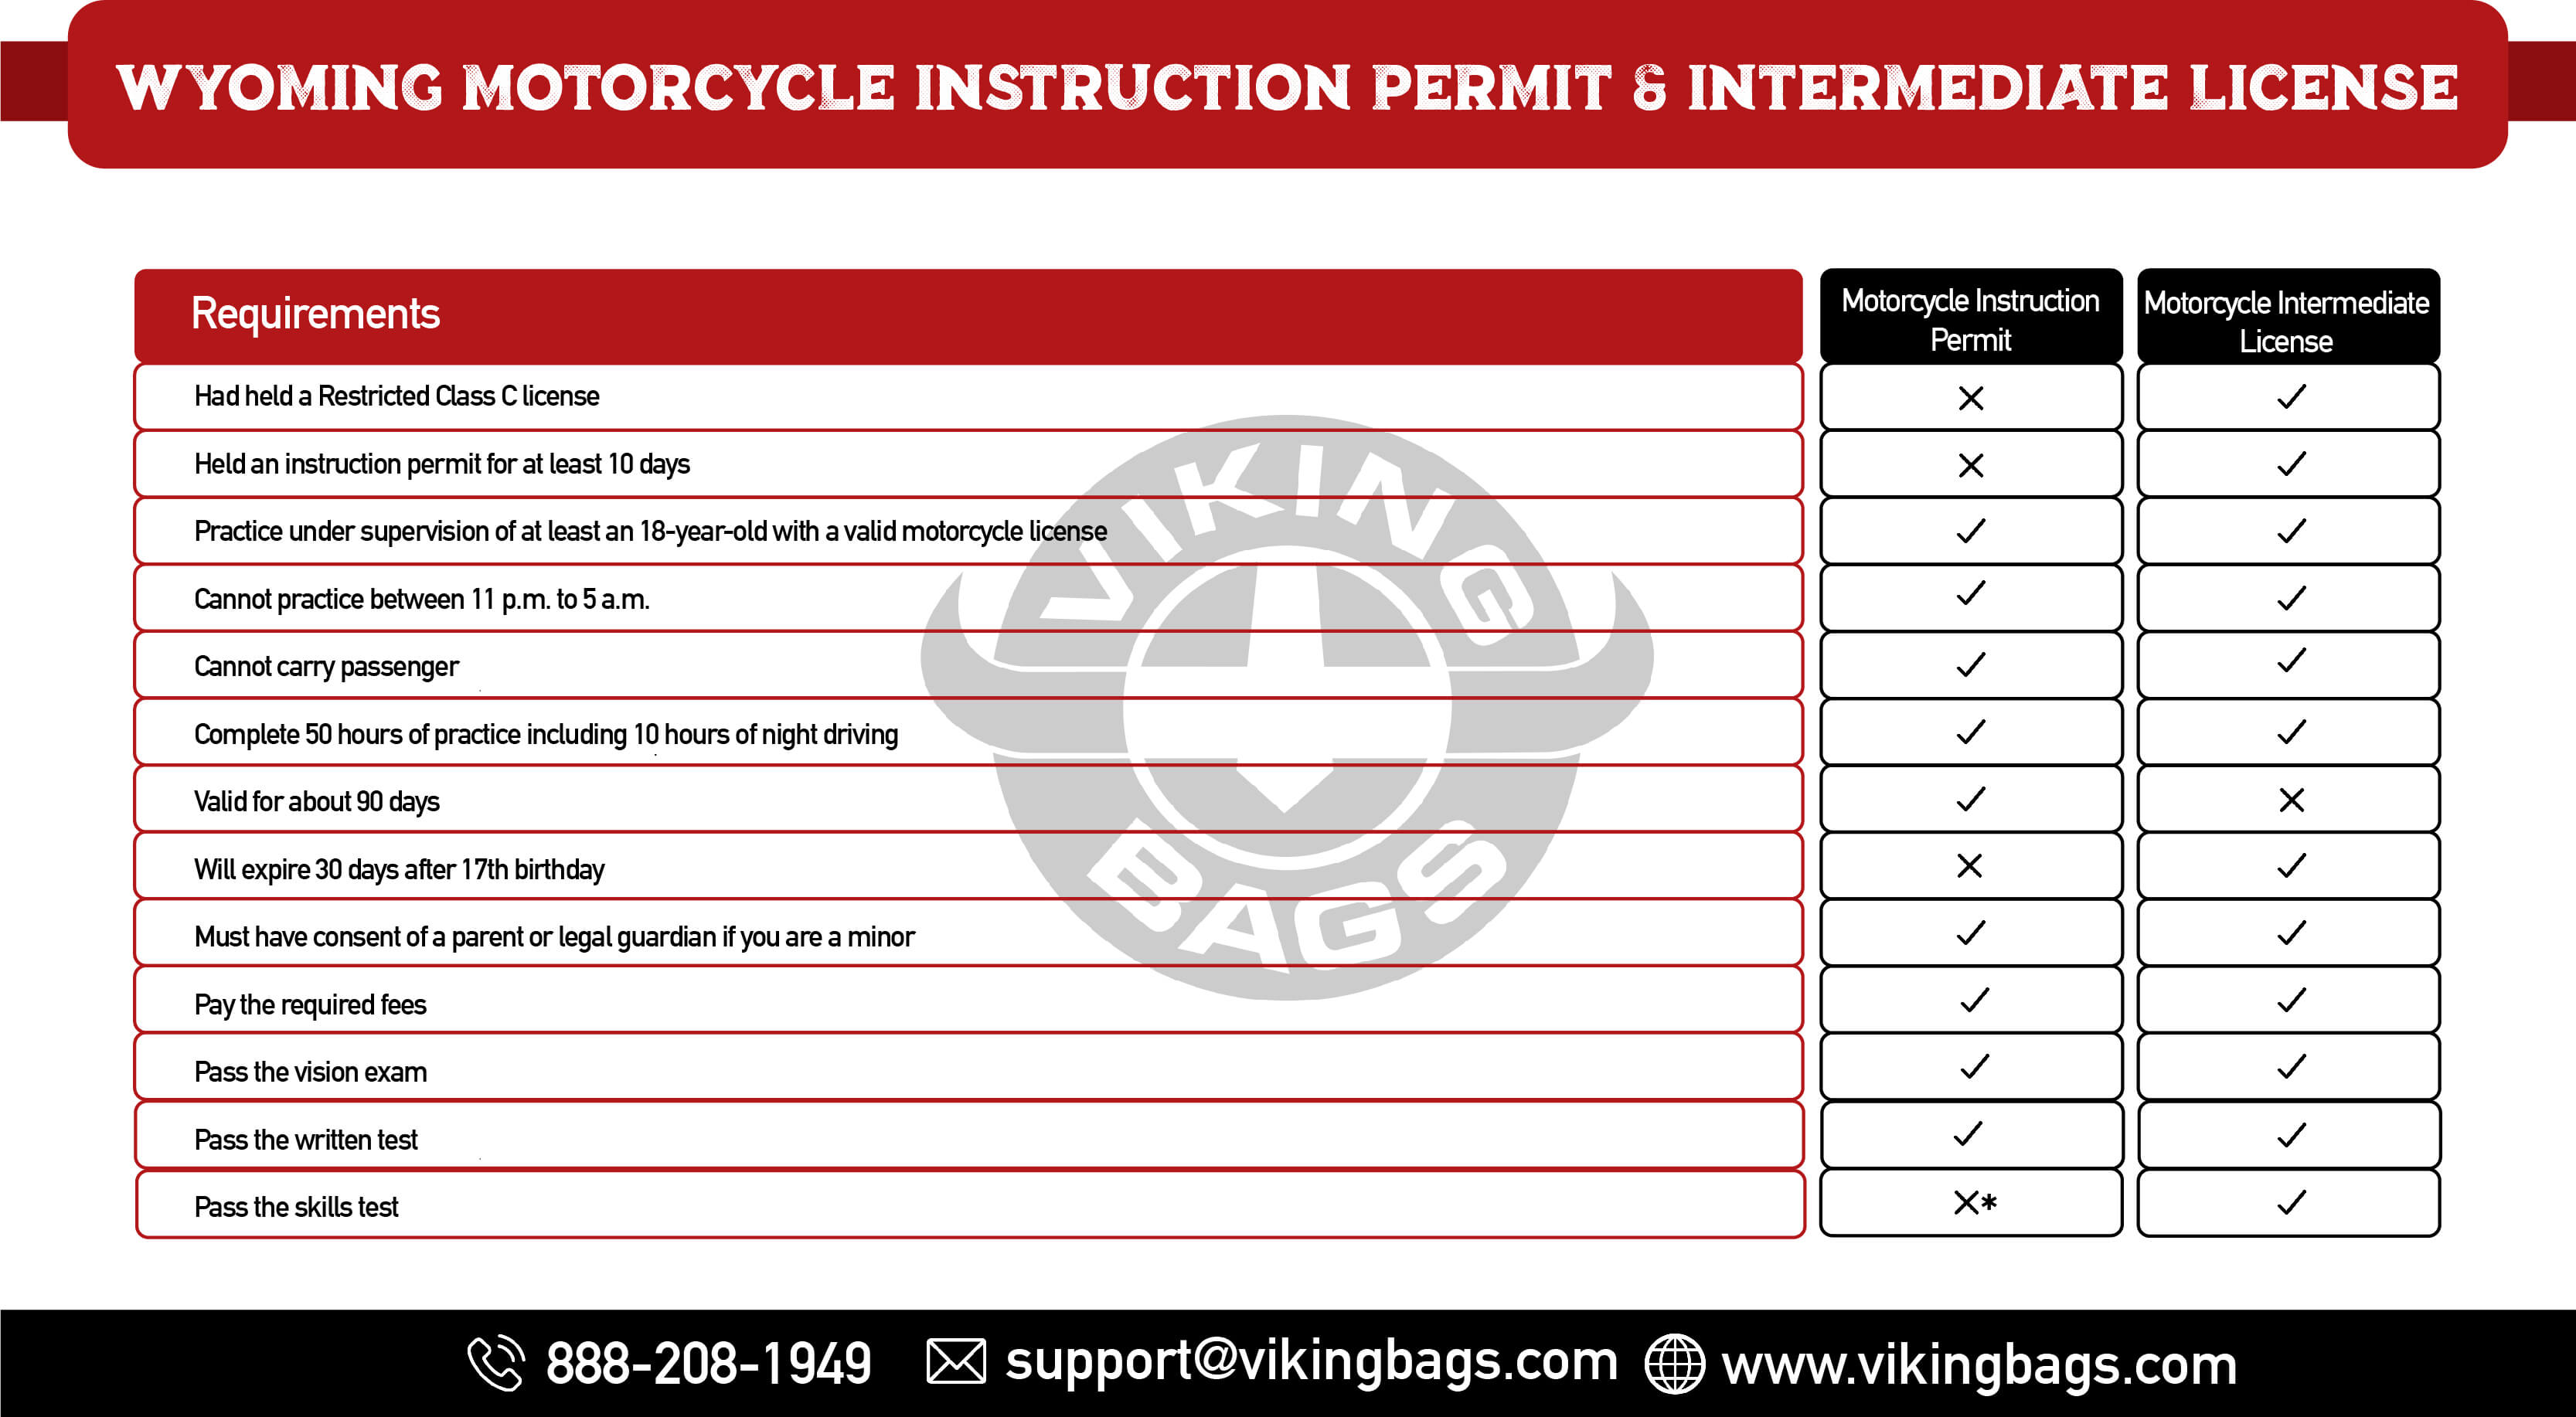 4. Wyoming Motorcycle Instruction Permit & Intermediate License